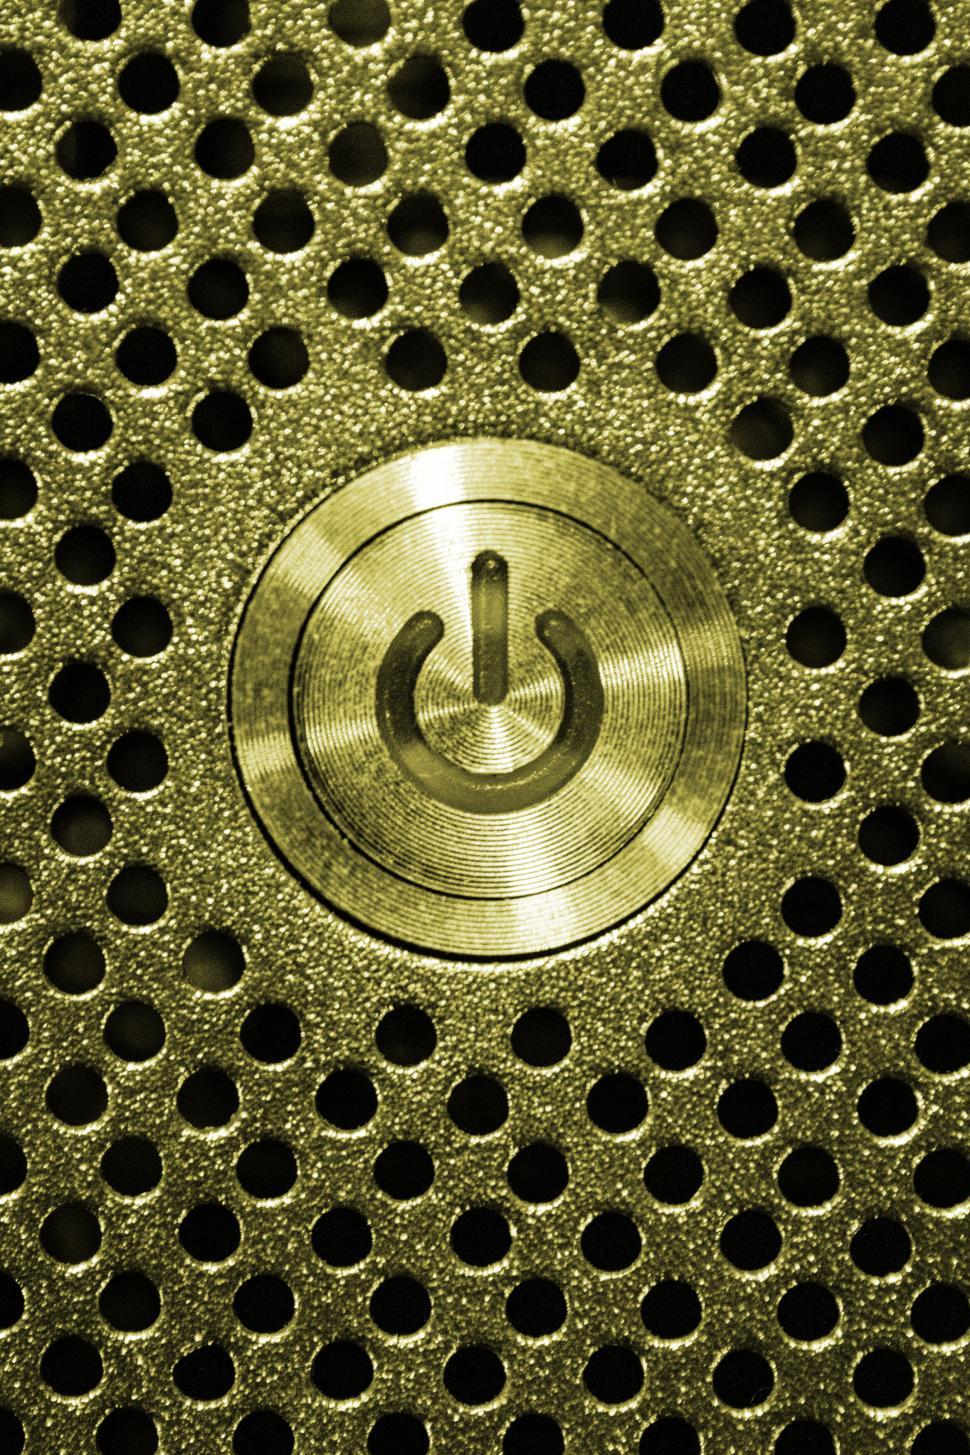 Free Image of Golden power button on metal surface 